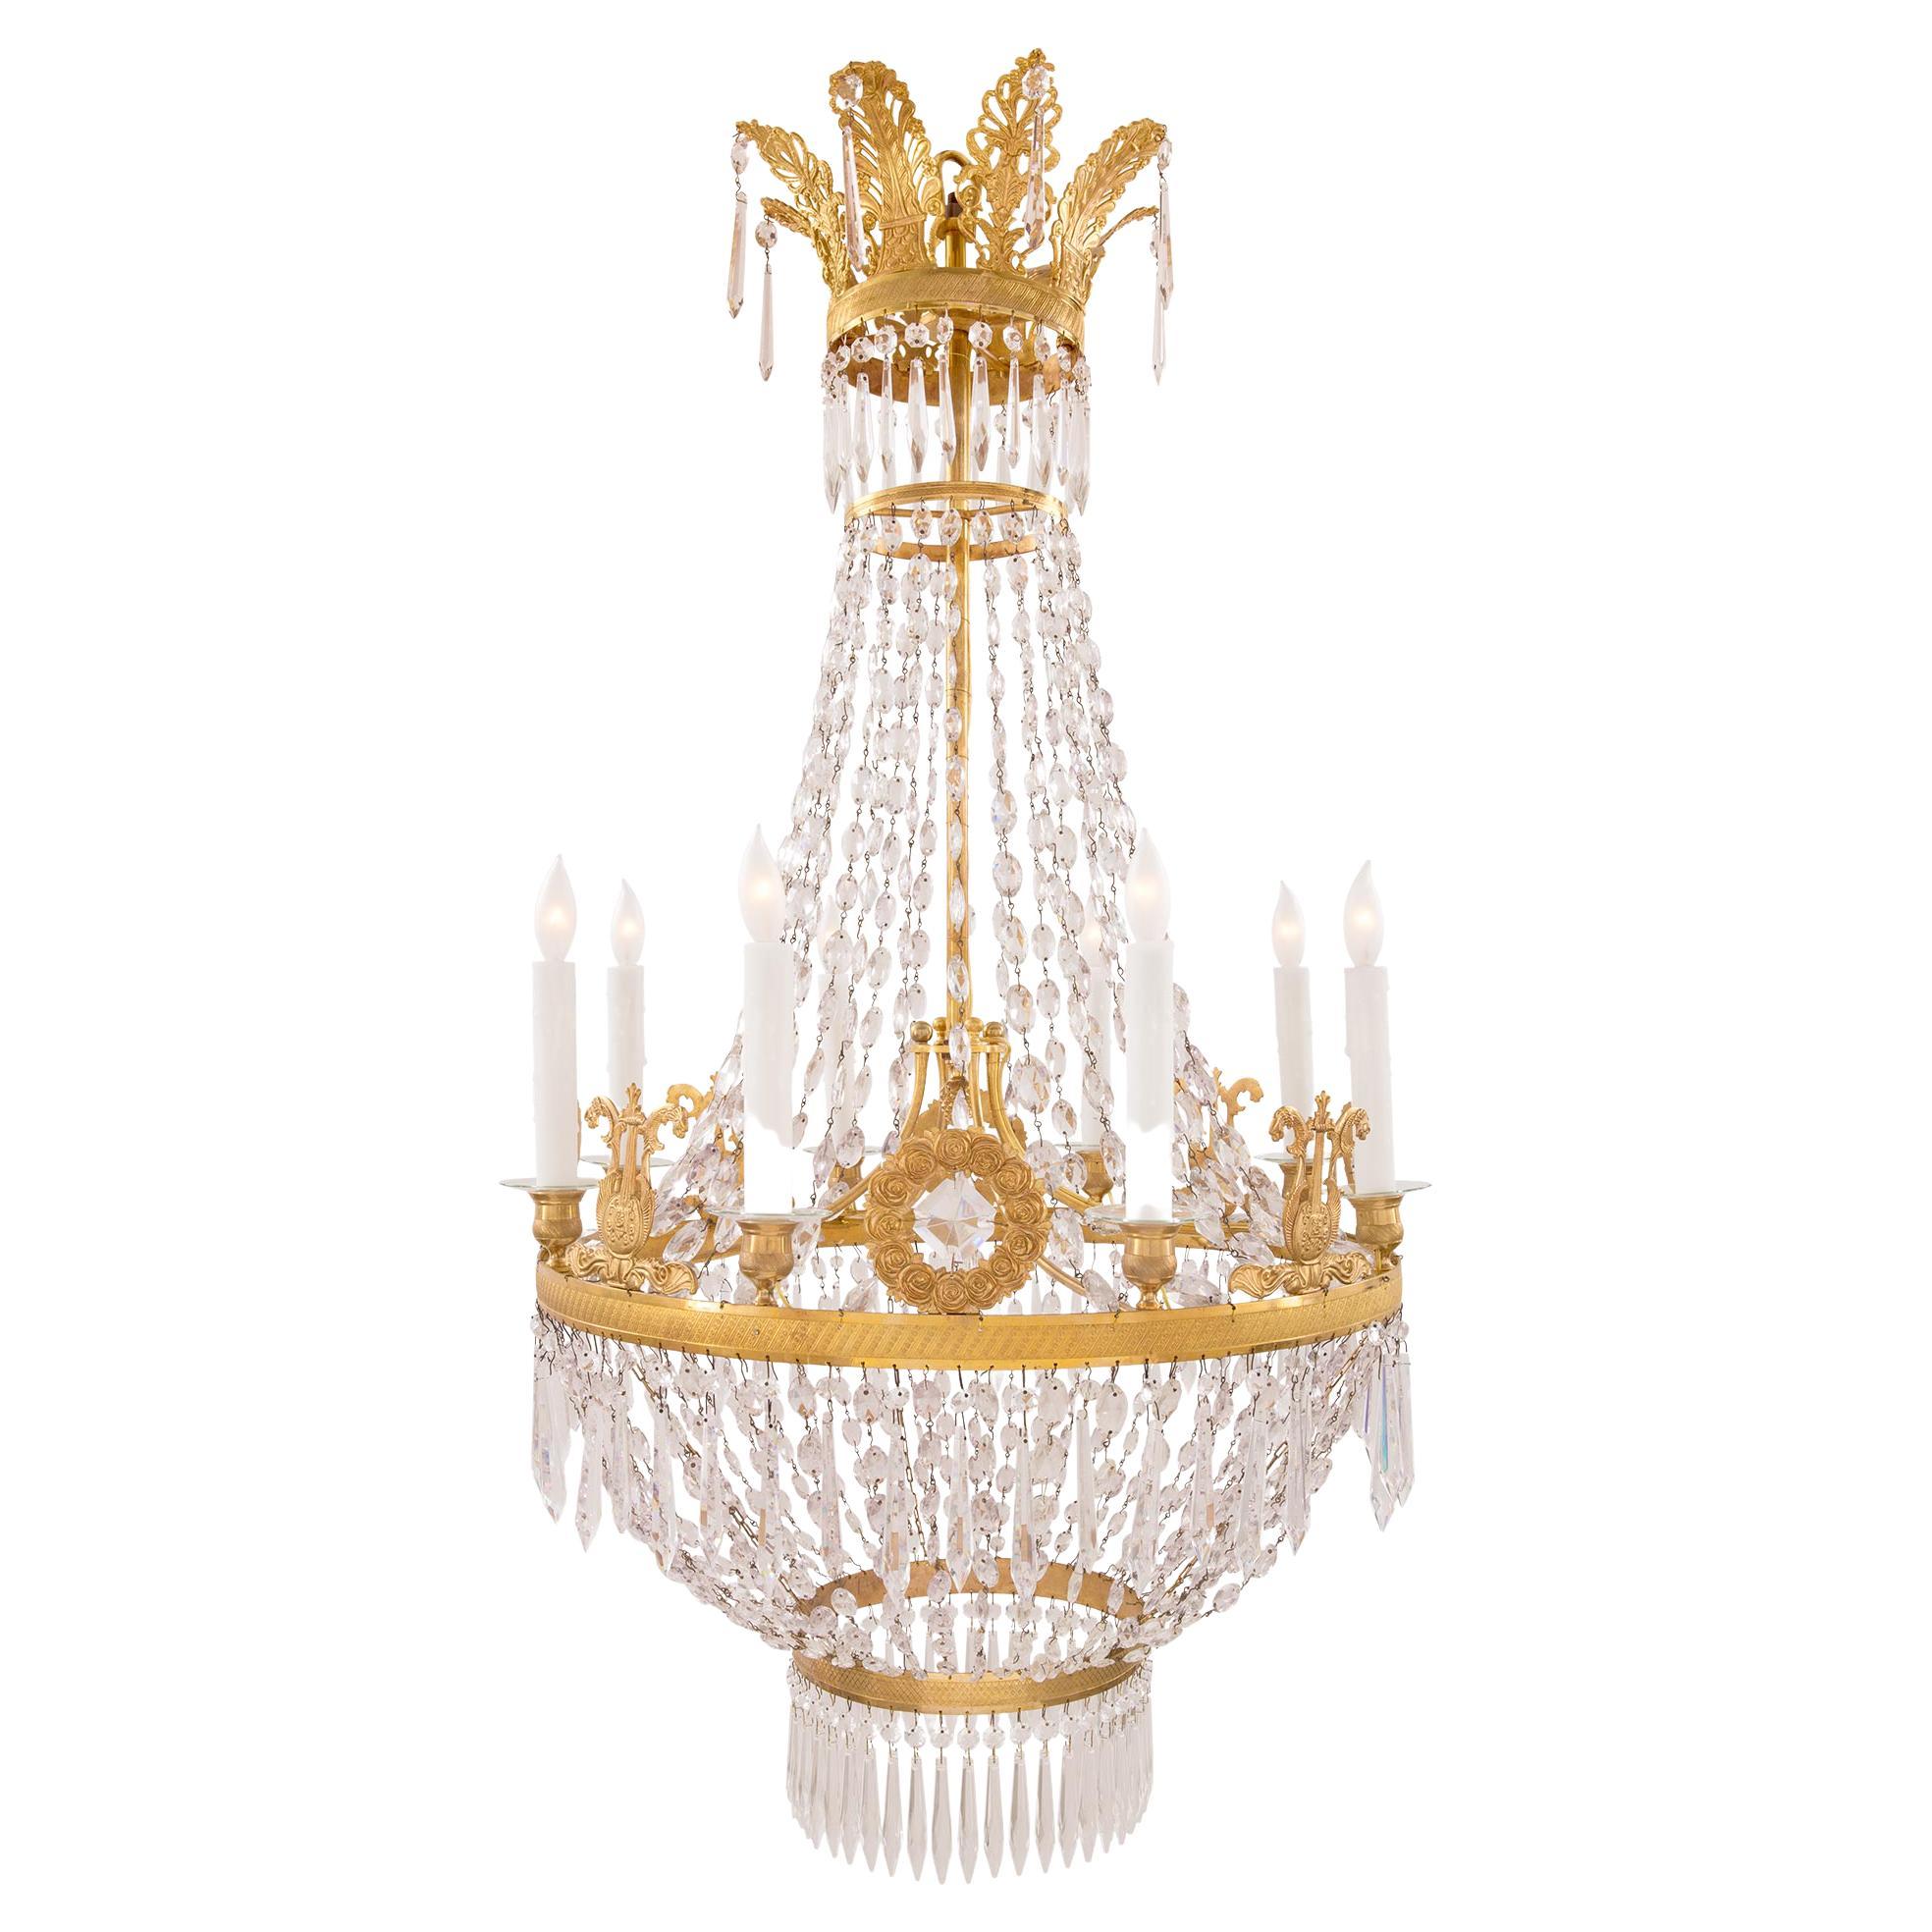 French 19th Century Neoclassical Style Ormolu and Baccarat Crystal Chandelier